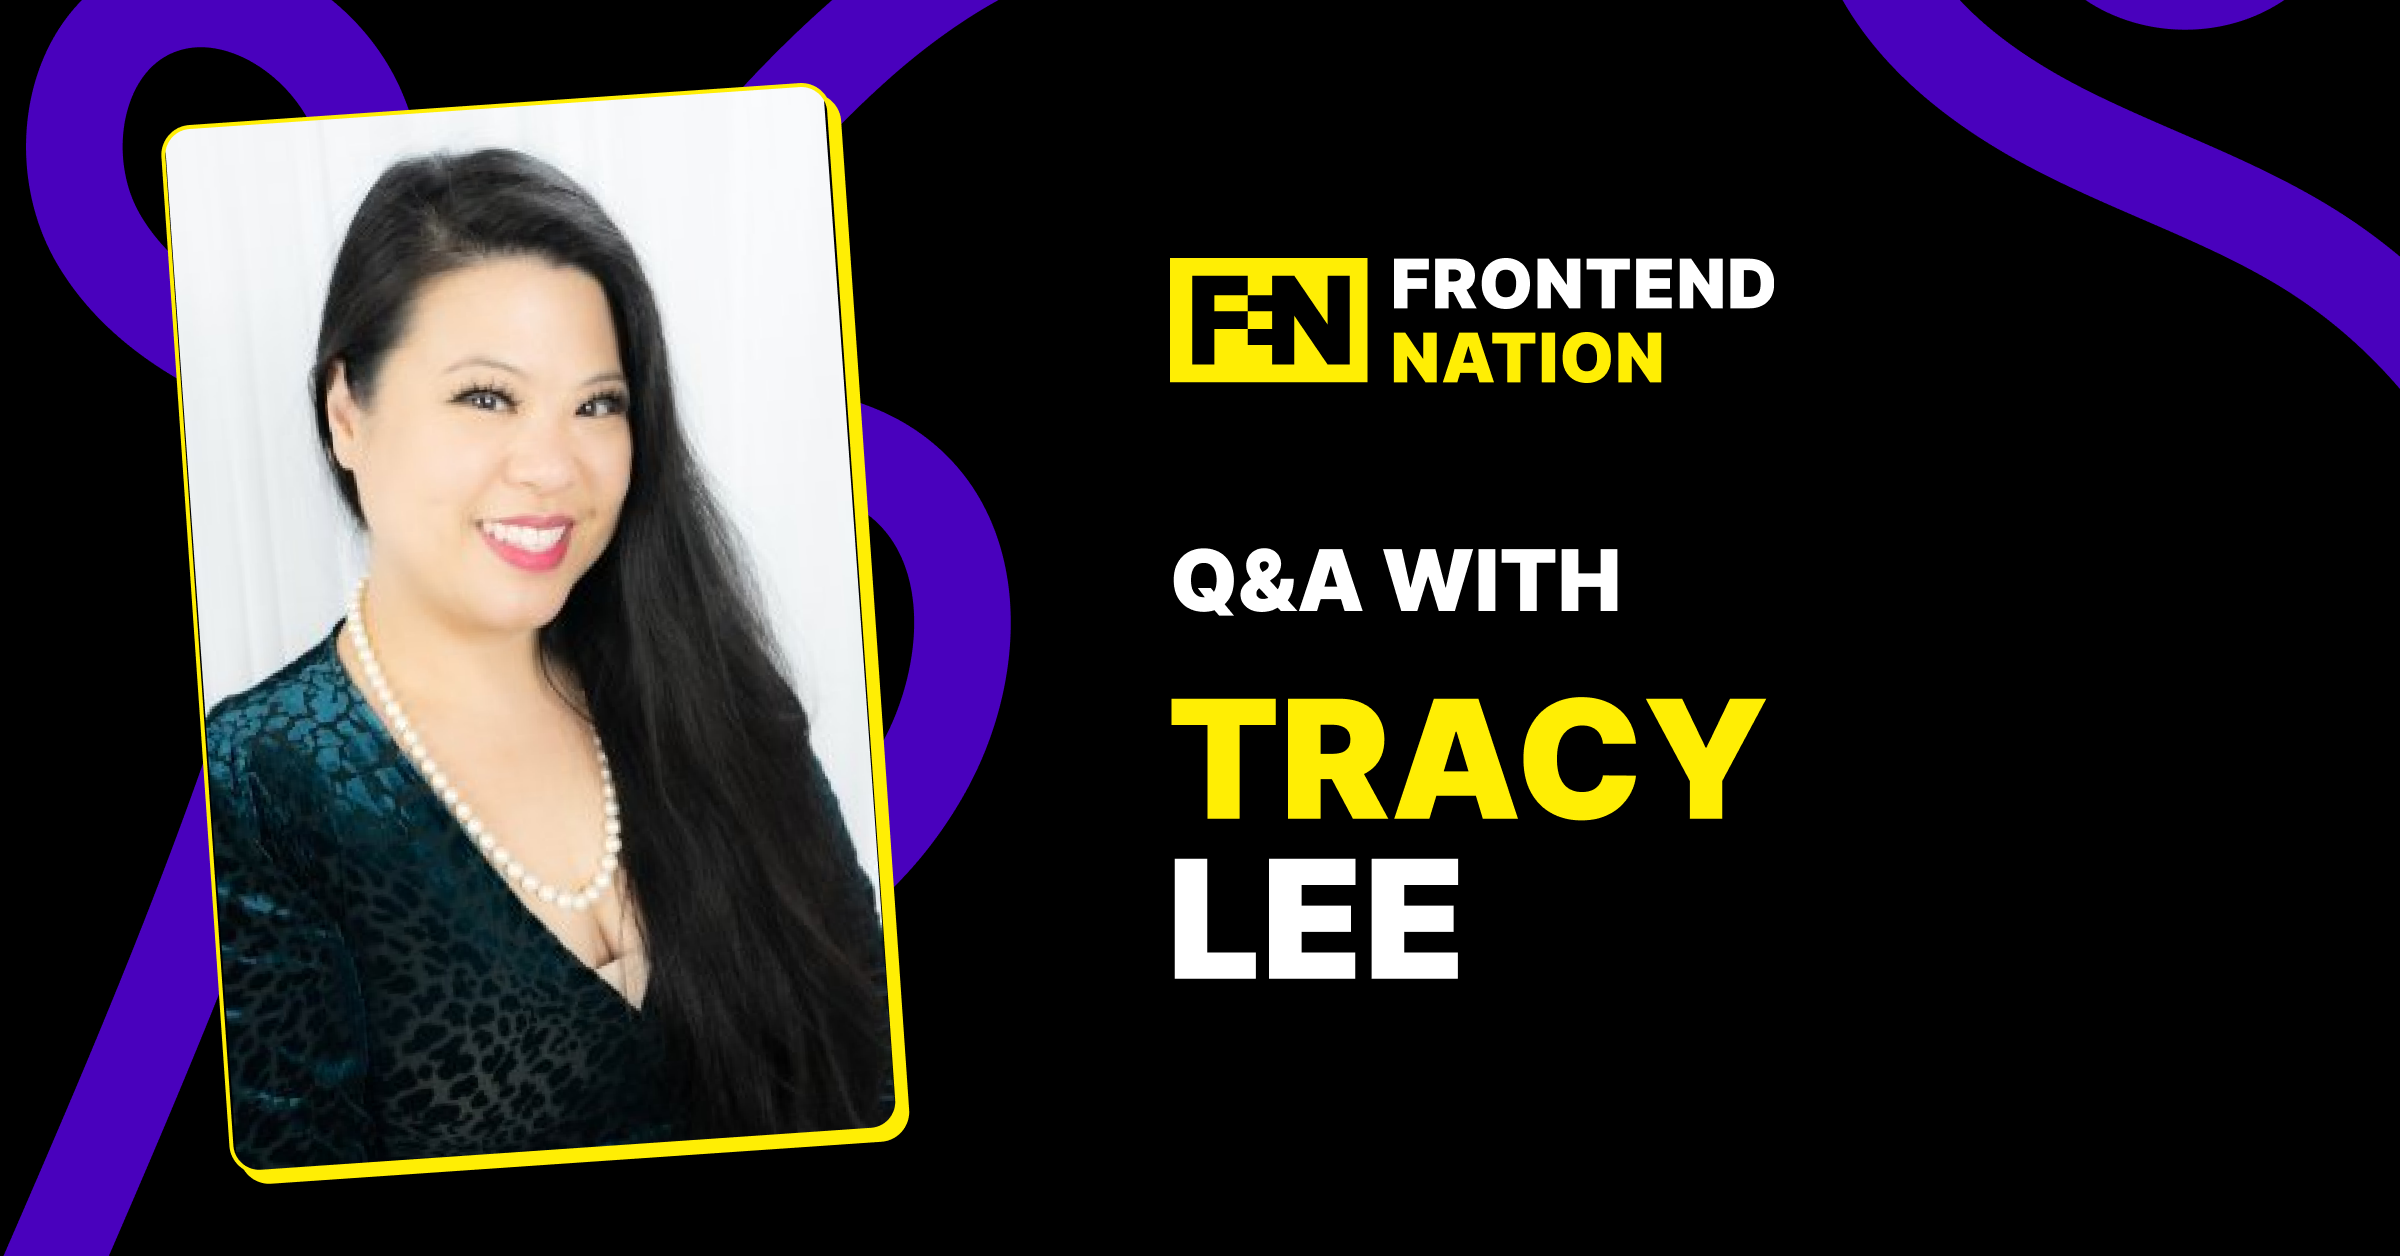 Tracy Lee on Web Development Trends, Challenges, and the Rise of AI